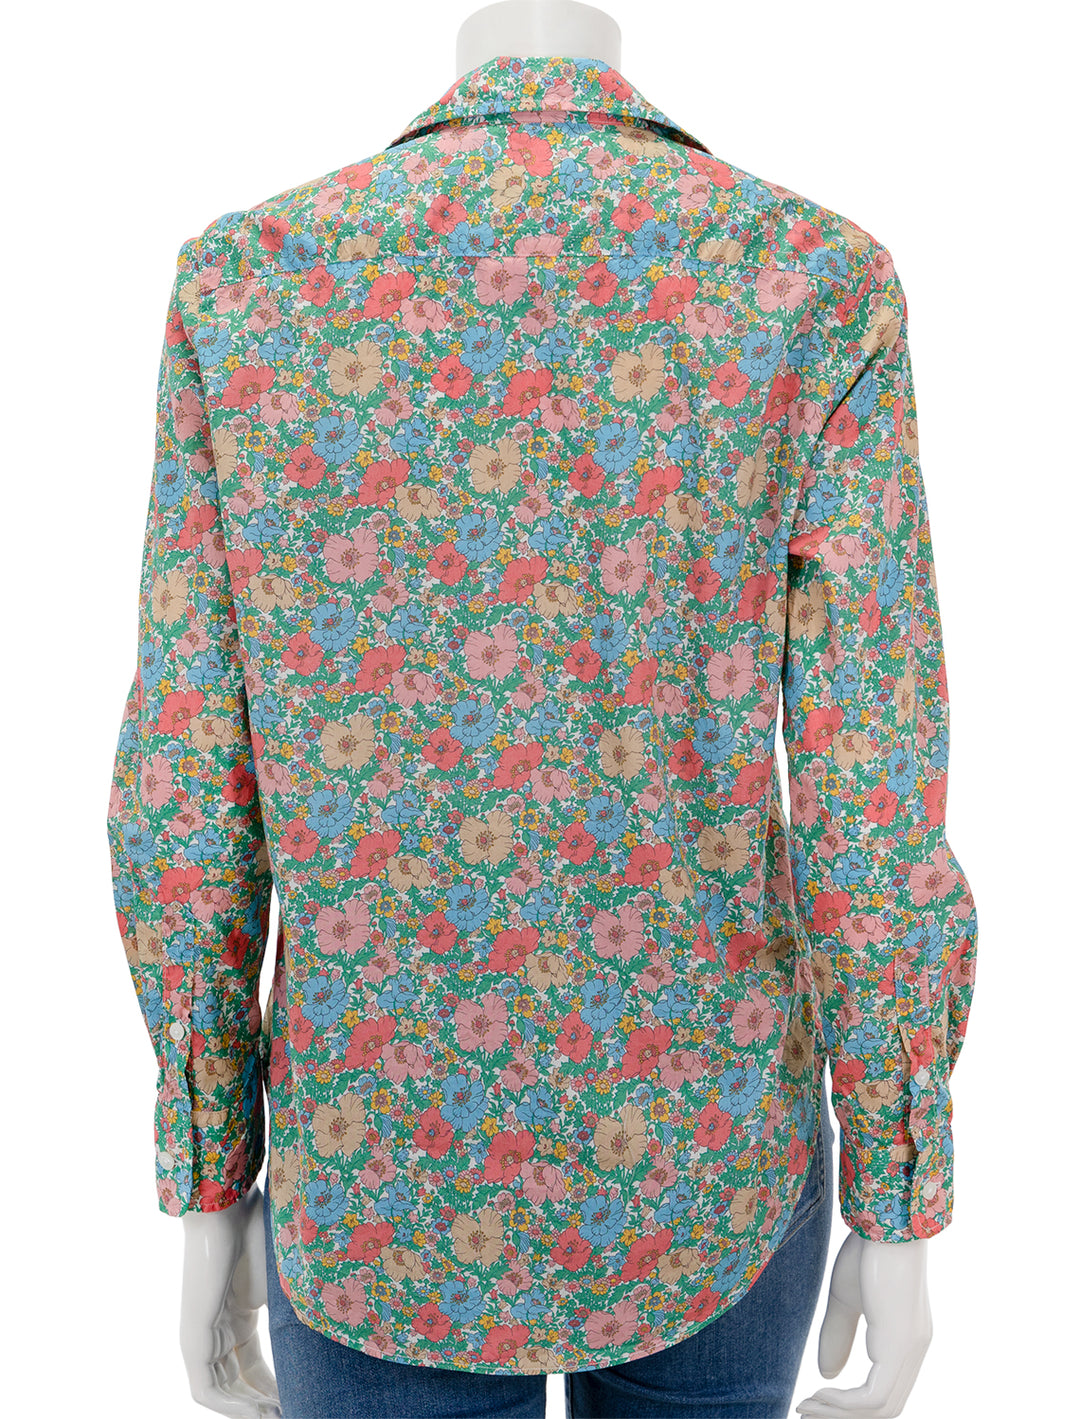 Back view of Frank & Eileen's eileen in pink, green and blue floral.